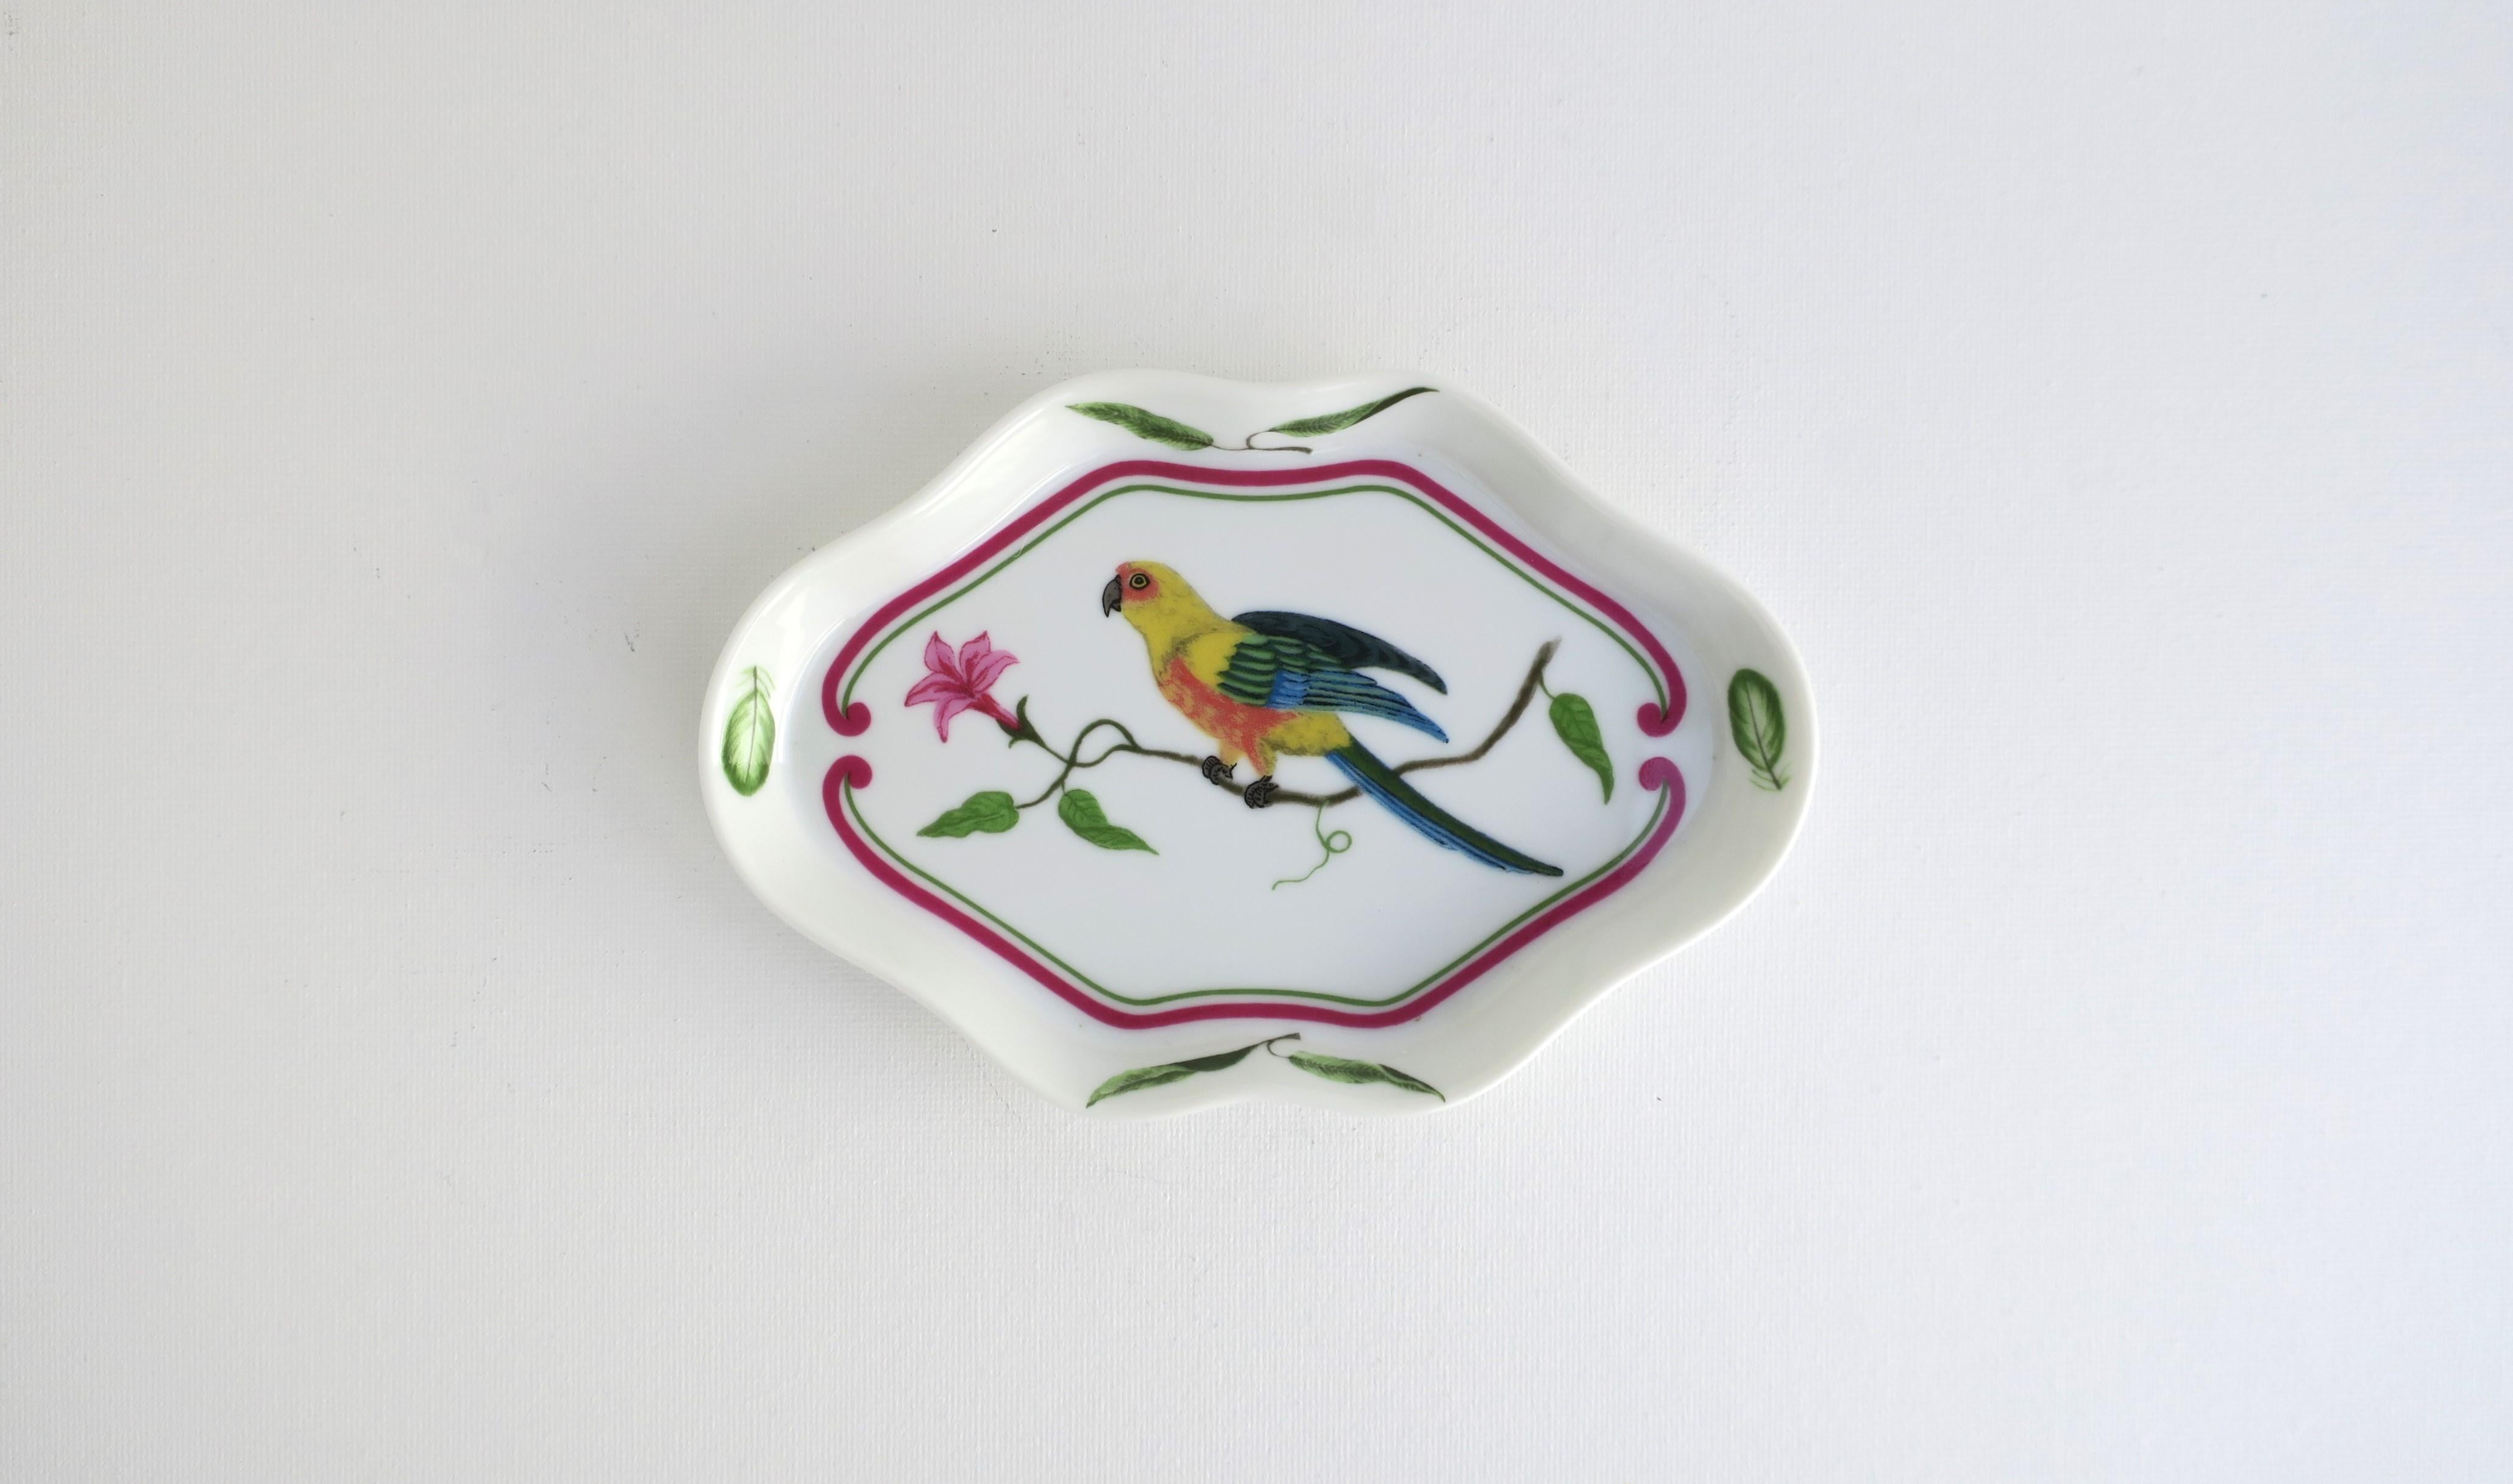 A very beautiful porcelain jewelry dish with tropical parrot bird design, circa 1980s, USA. Piece was made in 1989 as marked. Dish is oblong with scalloped edge, beautiful parrot bird front and center sitting on a hibiscus flower branch, outlined in